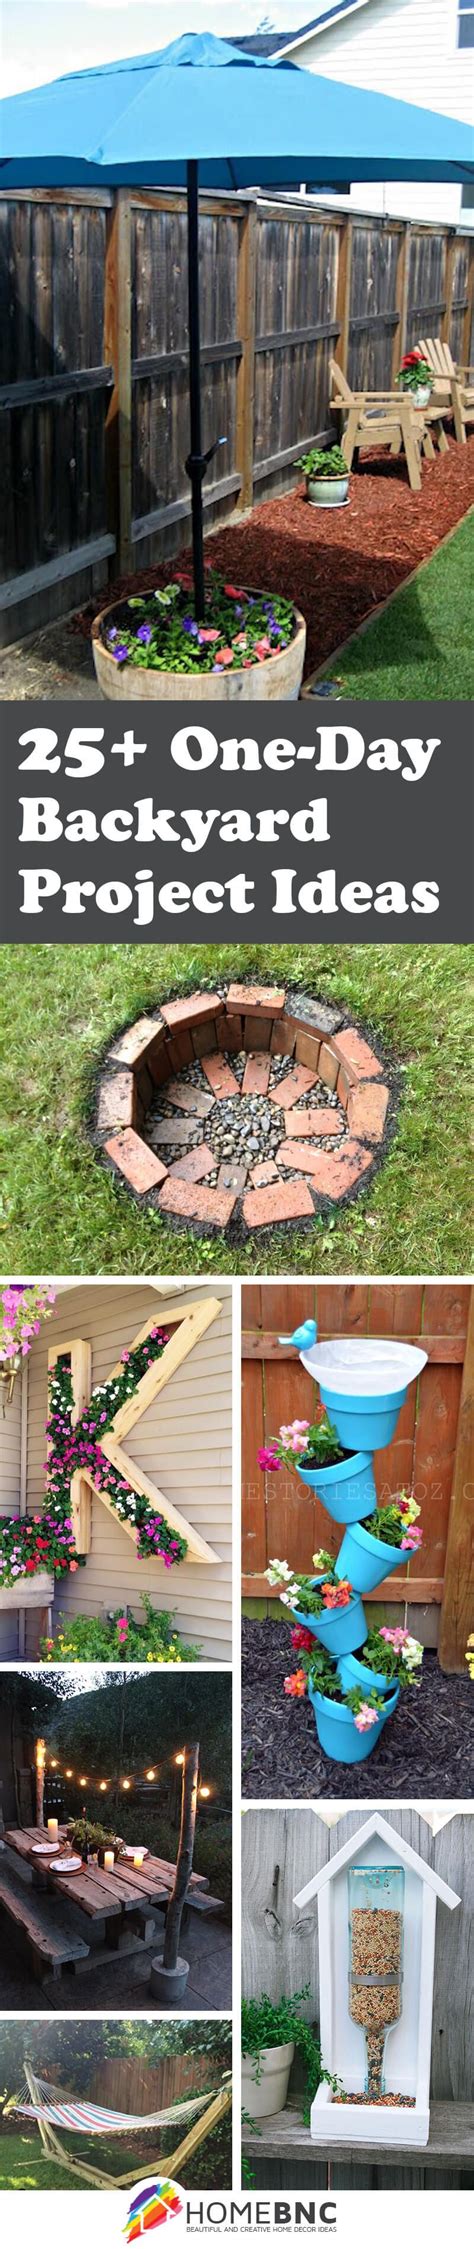 25 Awesome One Day Backyard Project Ideas To Spruce Up Your Outdoor